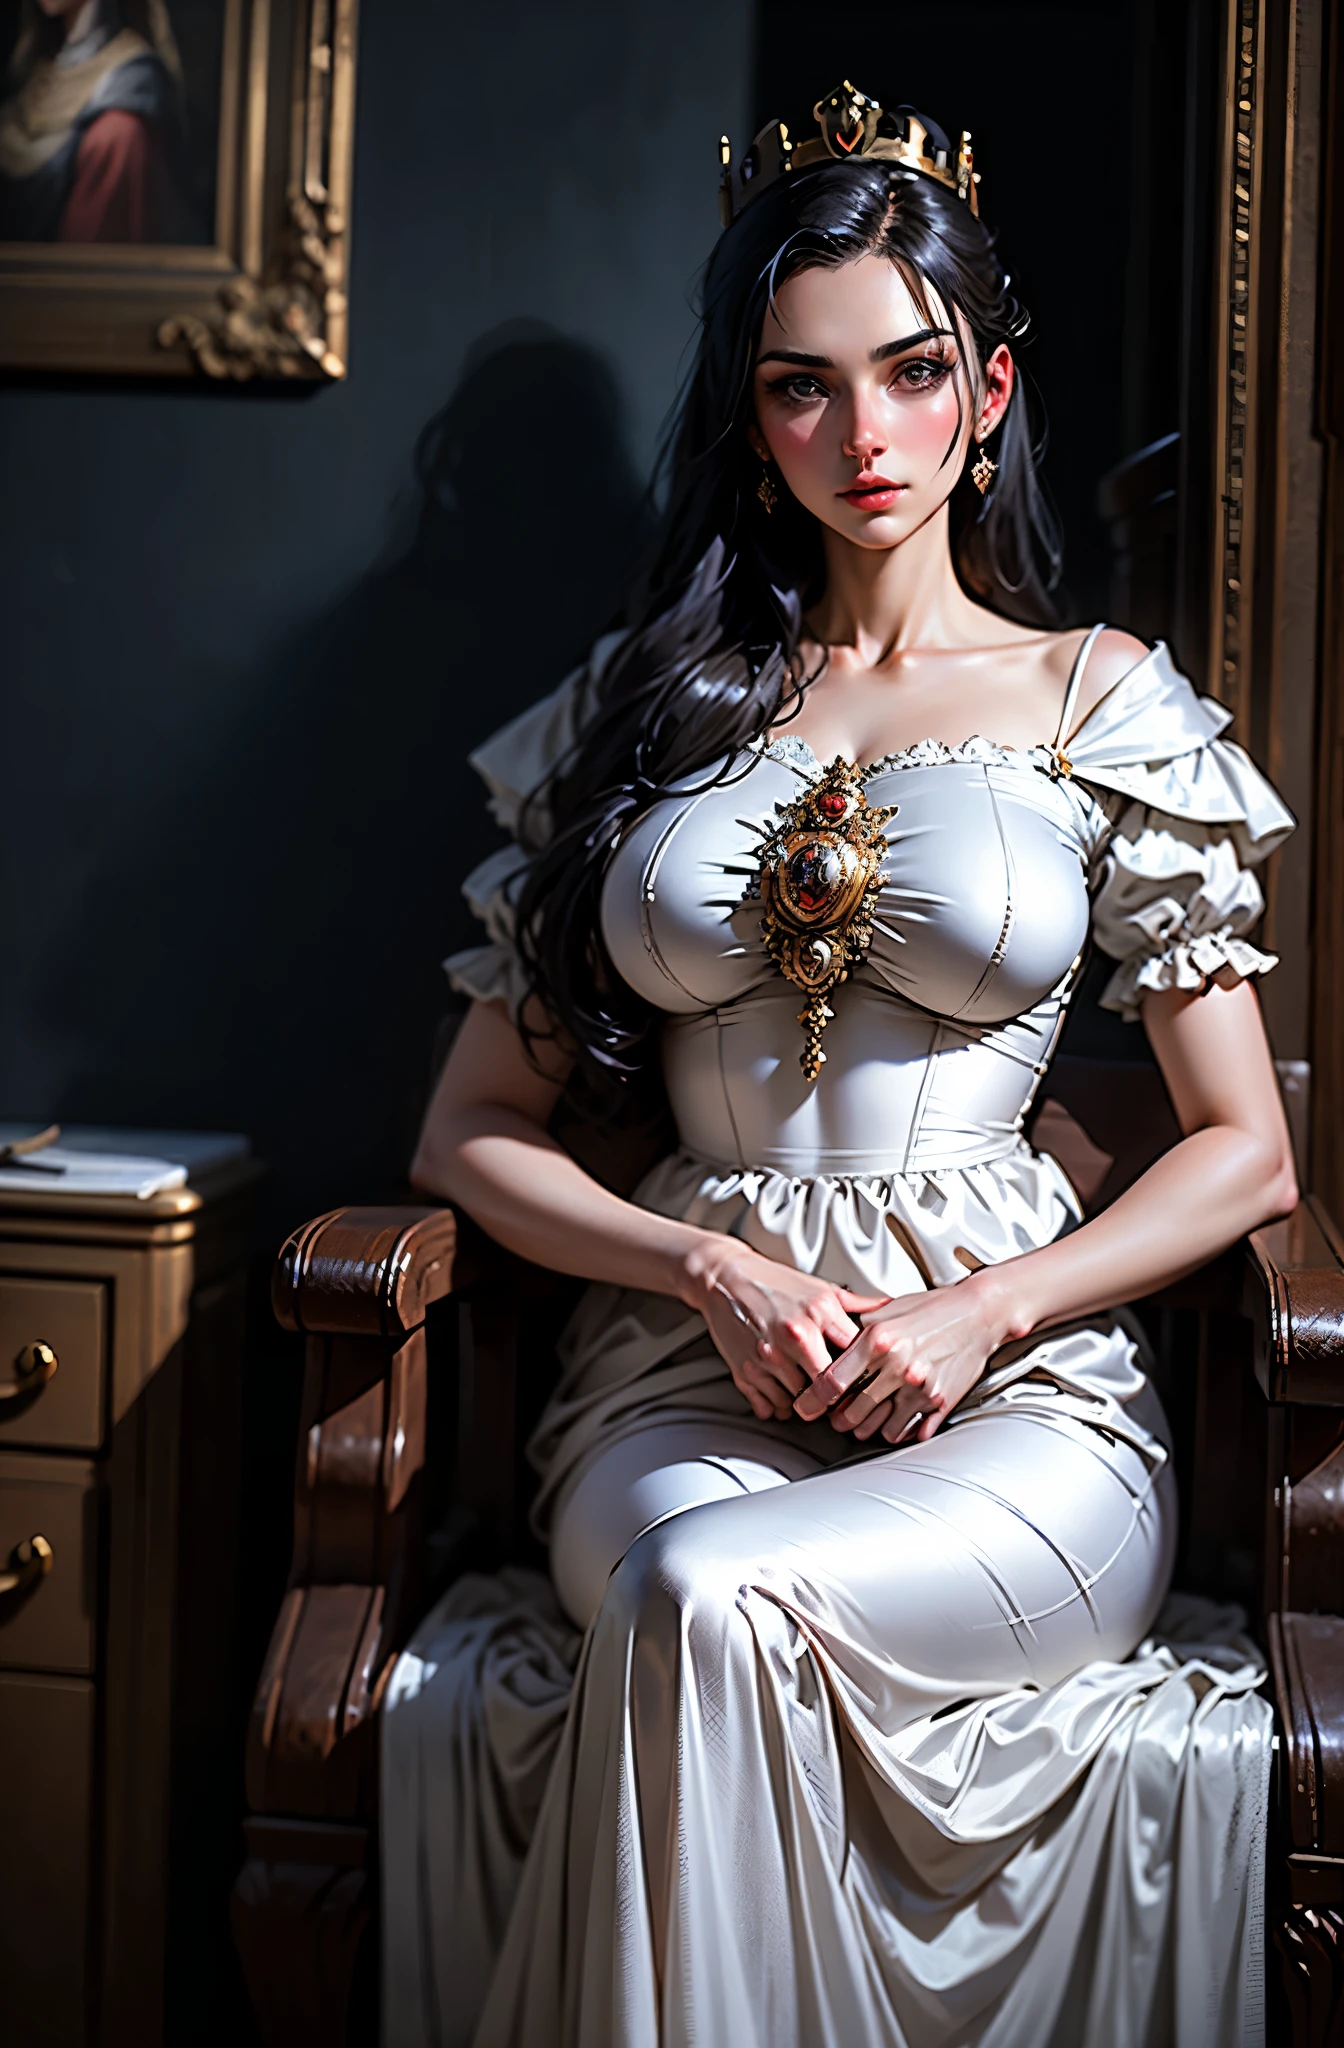 portrait, girl, middle ages, classicism, andrey atroshenko style, painting, traditional media, realistic, figurative, fine art, oil on canvas, HDR, 8k, original character, high resolution, high detail, focus on the face, thick-thighs, LONG AND BEAUTIFUL LEGS, YOUNG MAIDEN, muse, MEDIVAL PRINCESS, middle Ages, silver armor, SILVER DRESS, sitting, legs uncovered, sitting EM UM TRONO, sitting DE LADO, center of picture, center image, Silver dress, SILVER SHOULDER PADS, SILVER FURNITURE AROUND, SILVER DRESS, legs showing, low cut dress, silver crown, SILVER PRINCESS, silver-haired, SCANDINAVIAN, Caucasian skin, EUROPA MEDIEVAL1300, german, FILANDESA, IRISH NATIONALITY, AUSTRIAN NATIONALITY, ANCIENT EUROPE, silver armor
